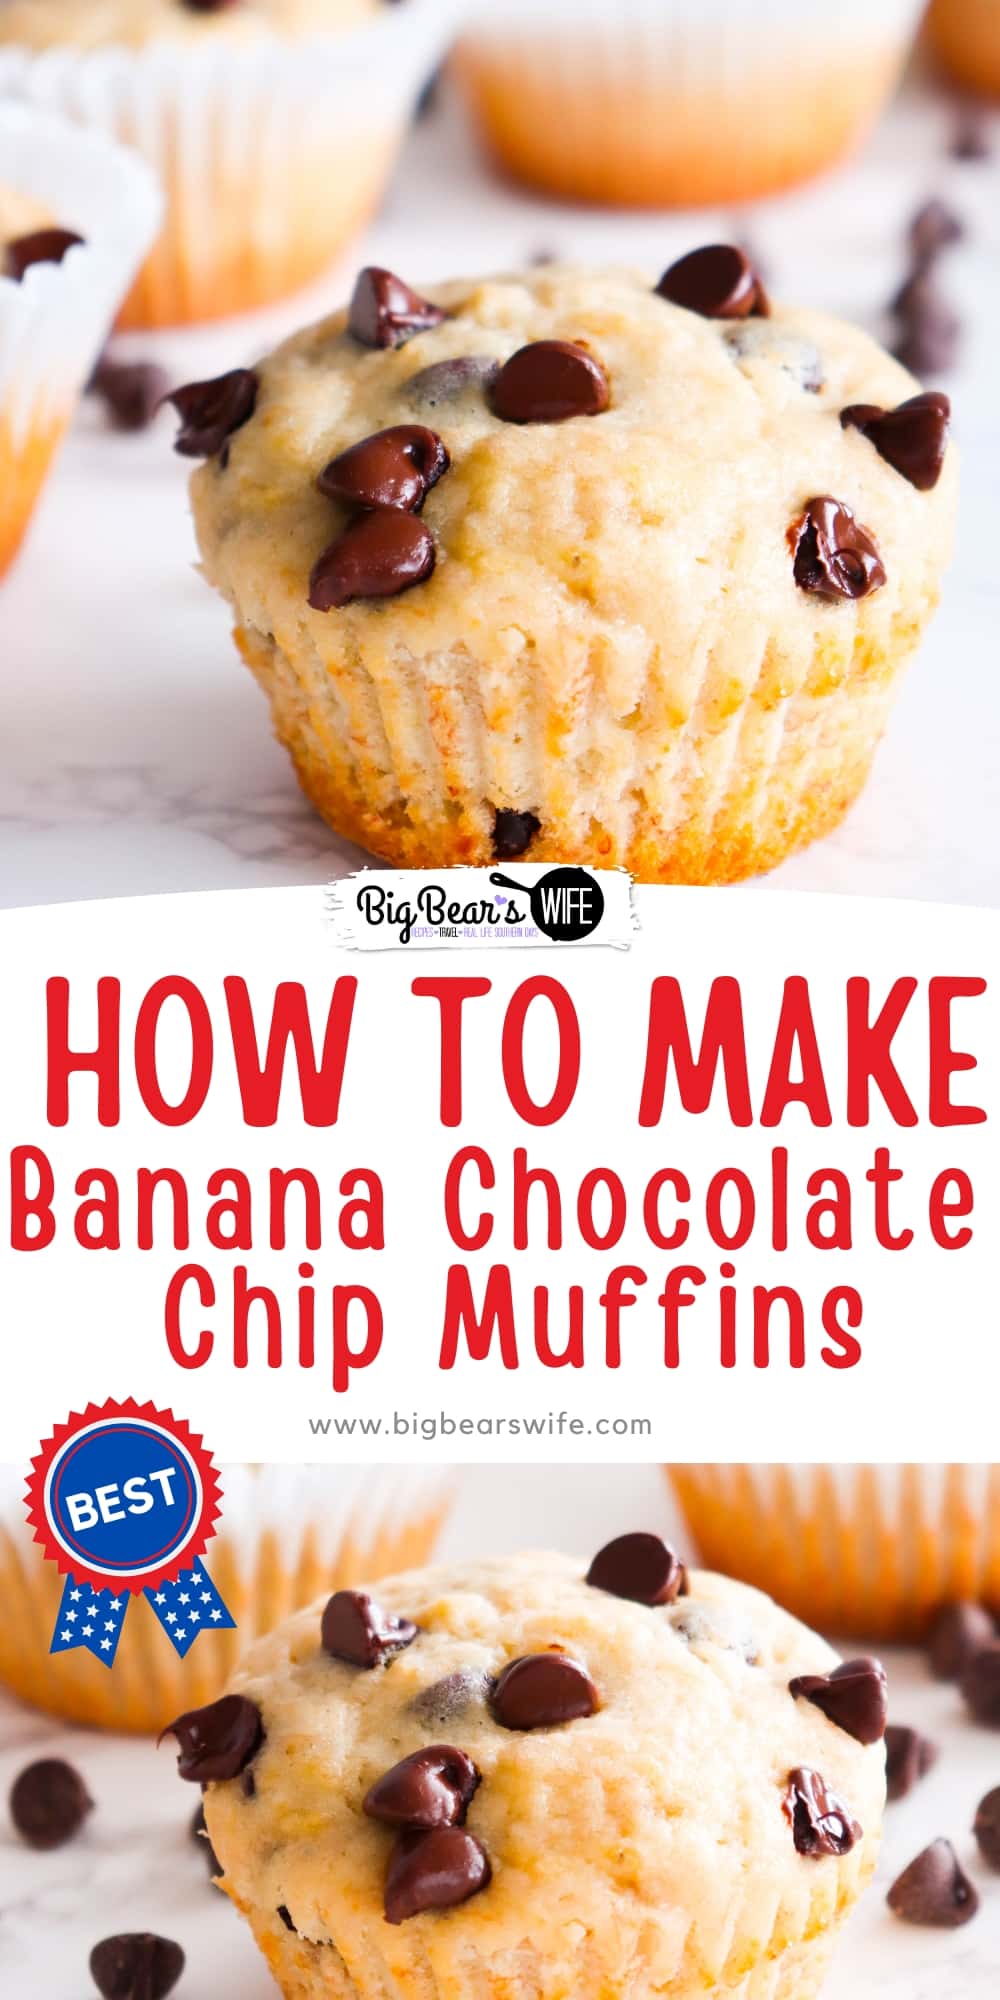 Are you a chocoholic? Love banana? If so, you'll love this recipe for banana chocolate chip muffins that are loaded with chocolate chips in every bite. This recipe is easy to follow and yields a deliciously moist and decadent muffin that's perfect for breakfast or dessert. via @bigbearswife